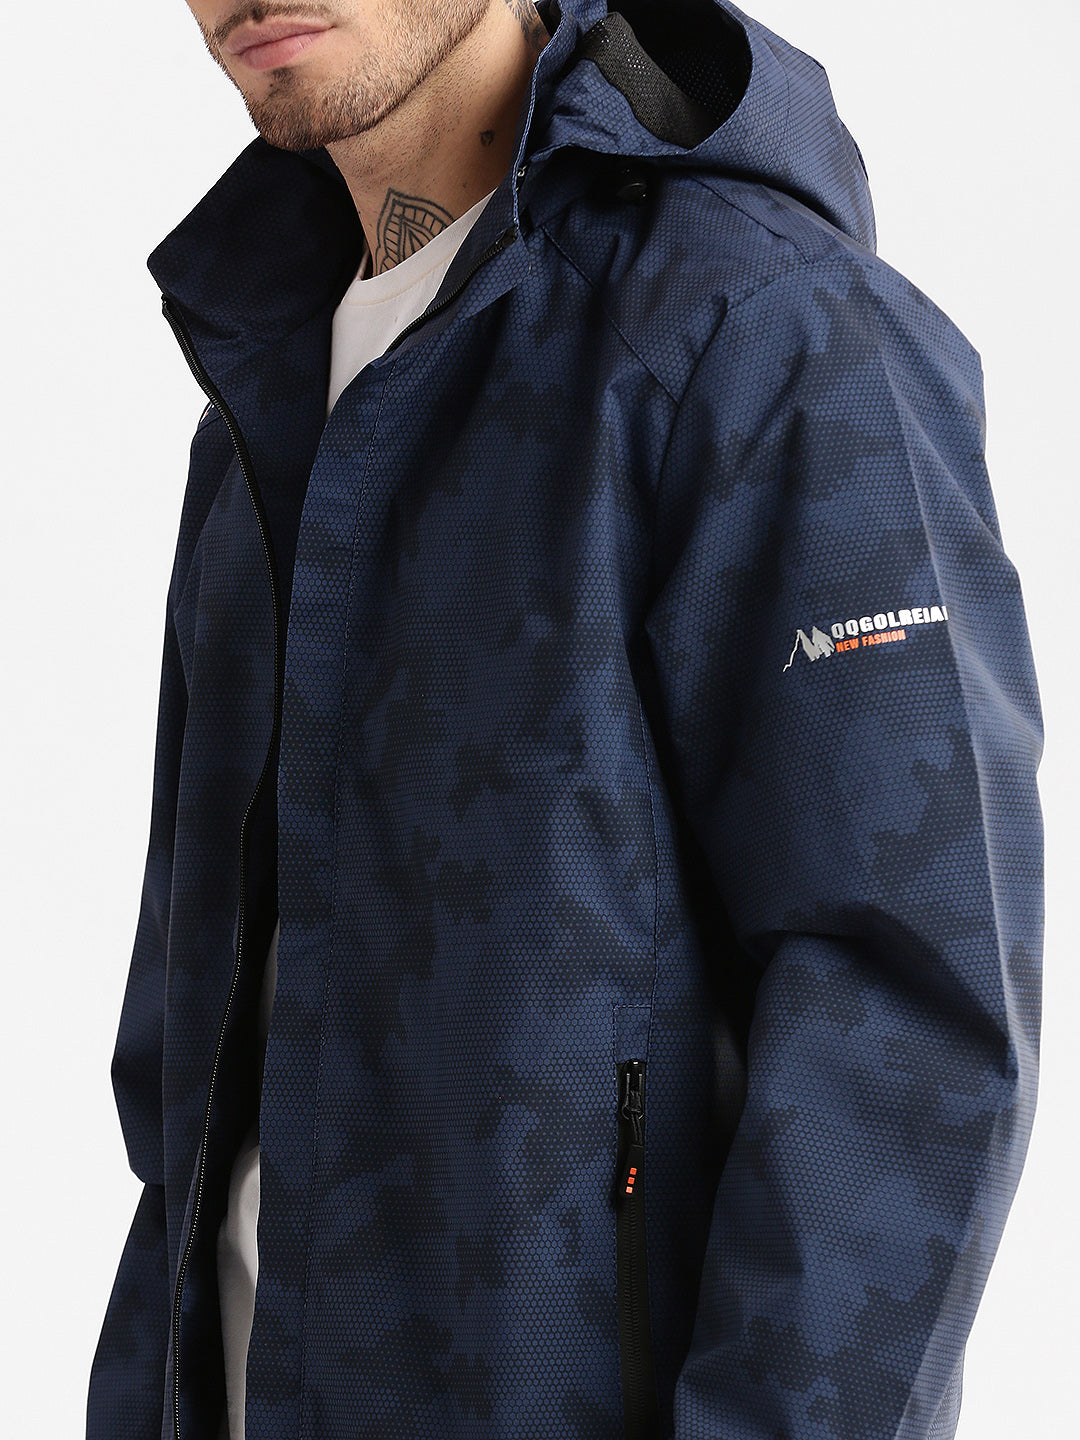 Men Hooded Navy Blue Geometric Tailored Oversized Jacket comes with Detachable Hoodie